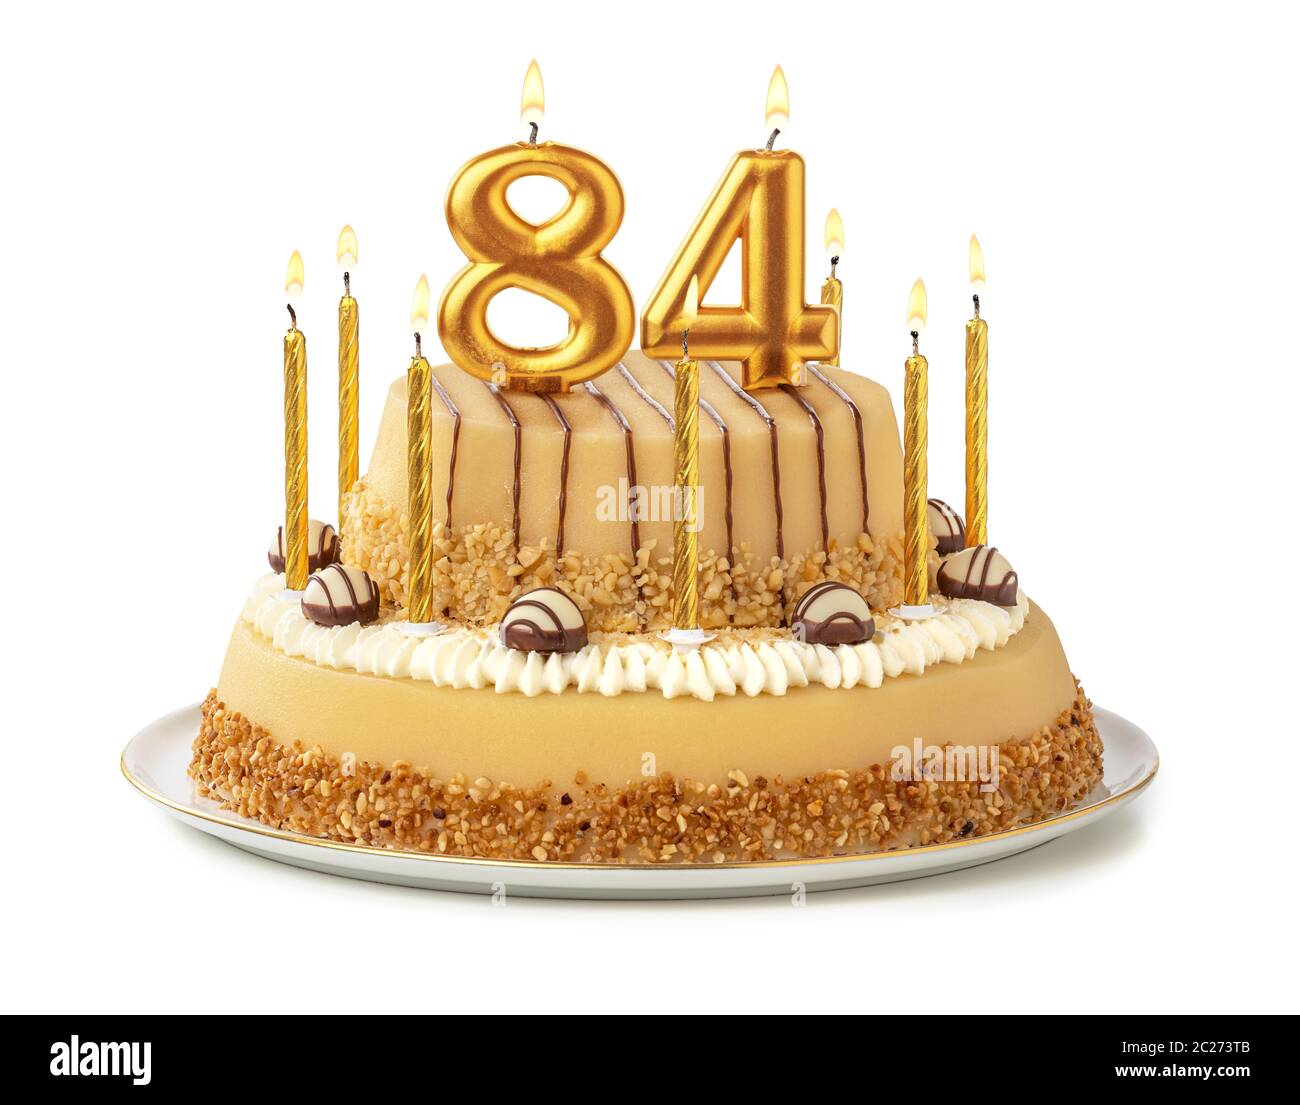 Festive cake with golden candles - Number 84 Stock Photo